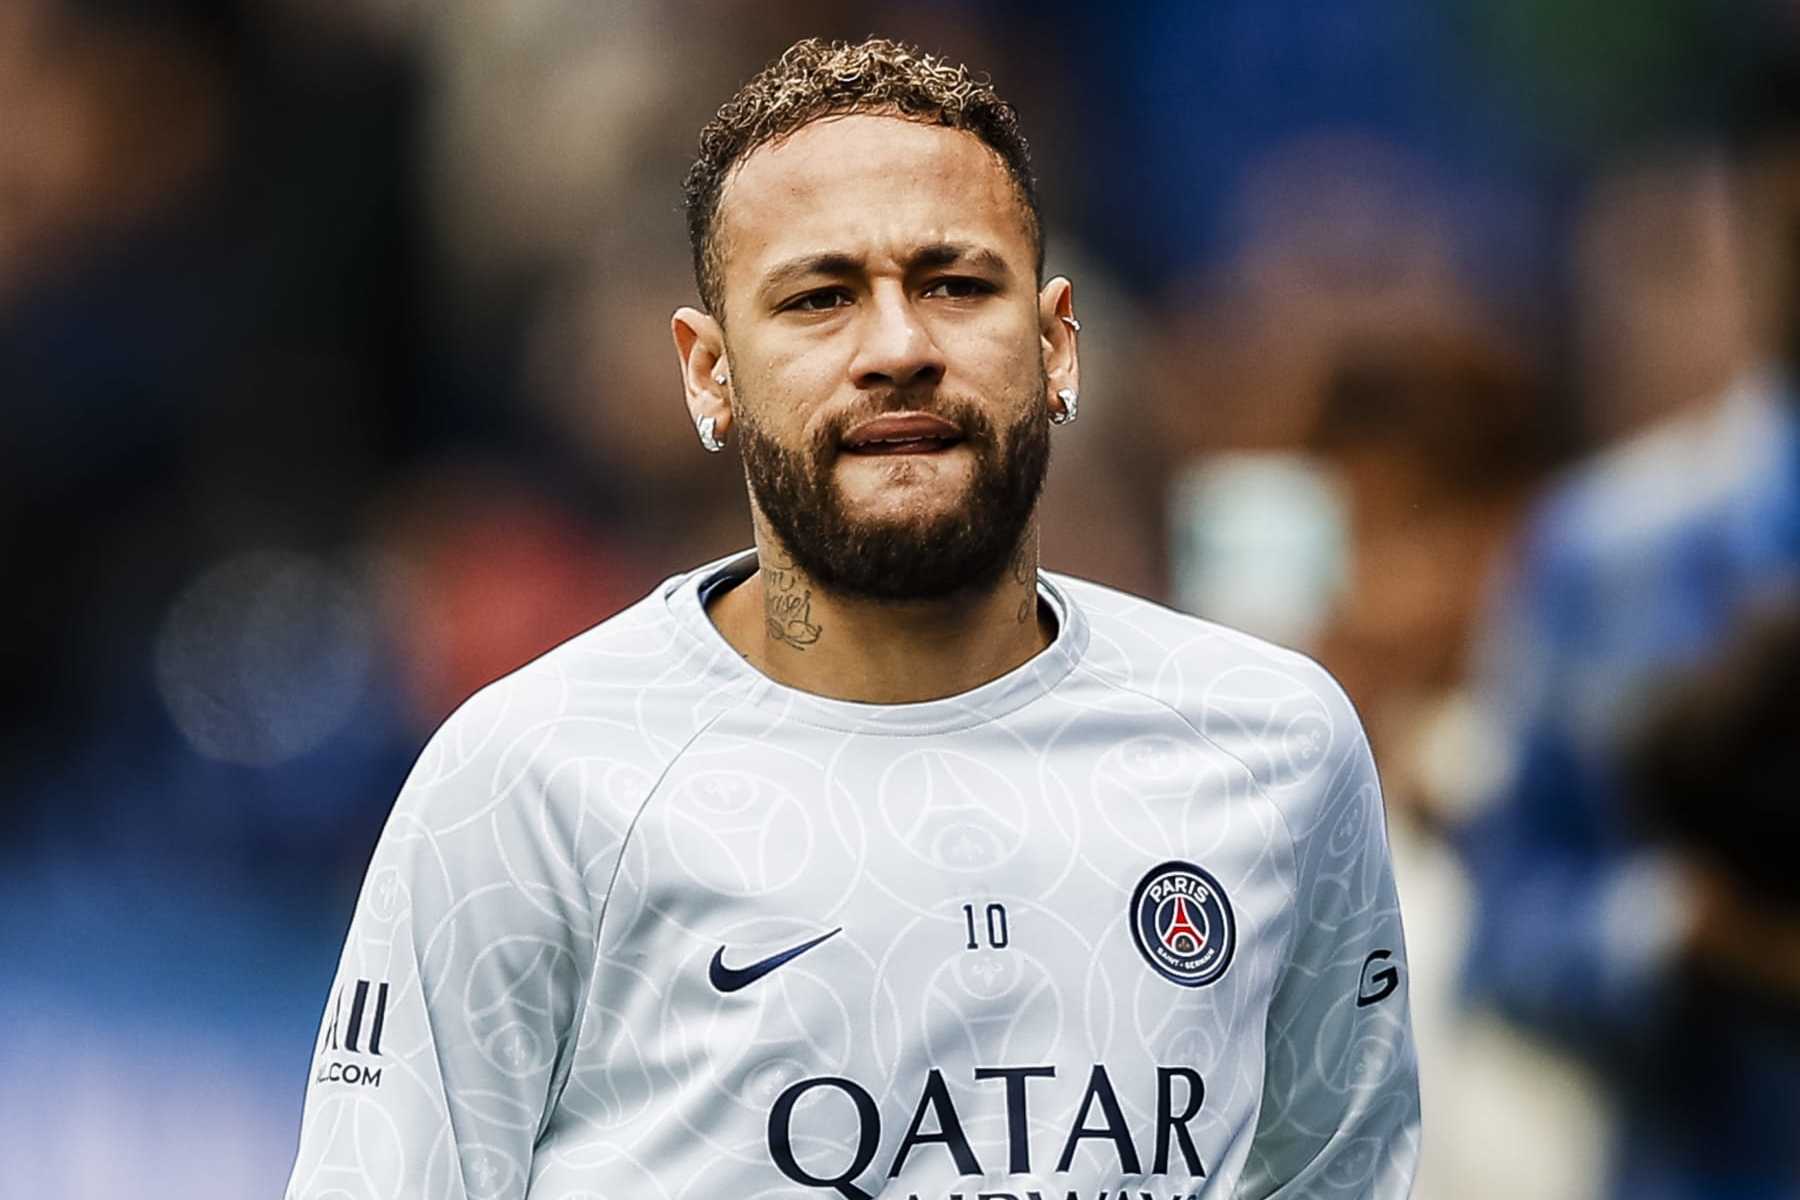 Neymar fined over 3m dollars for building artificial lake without  permission